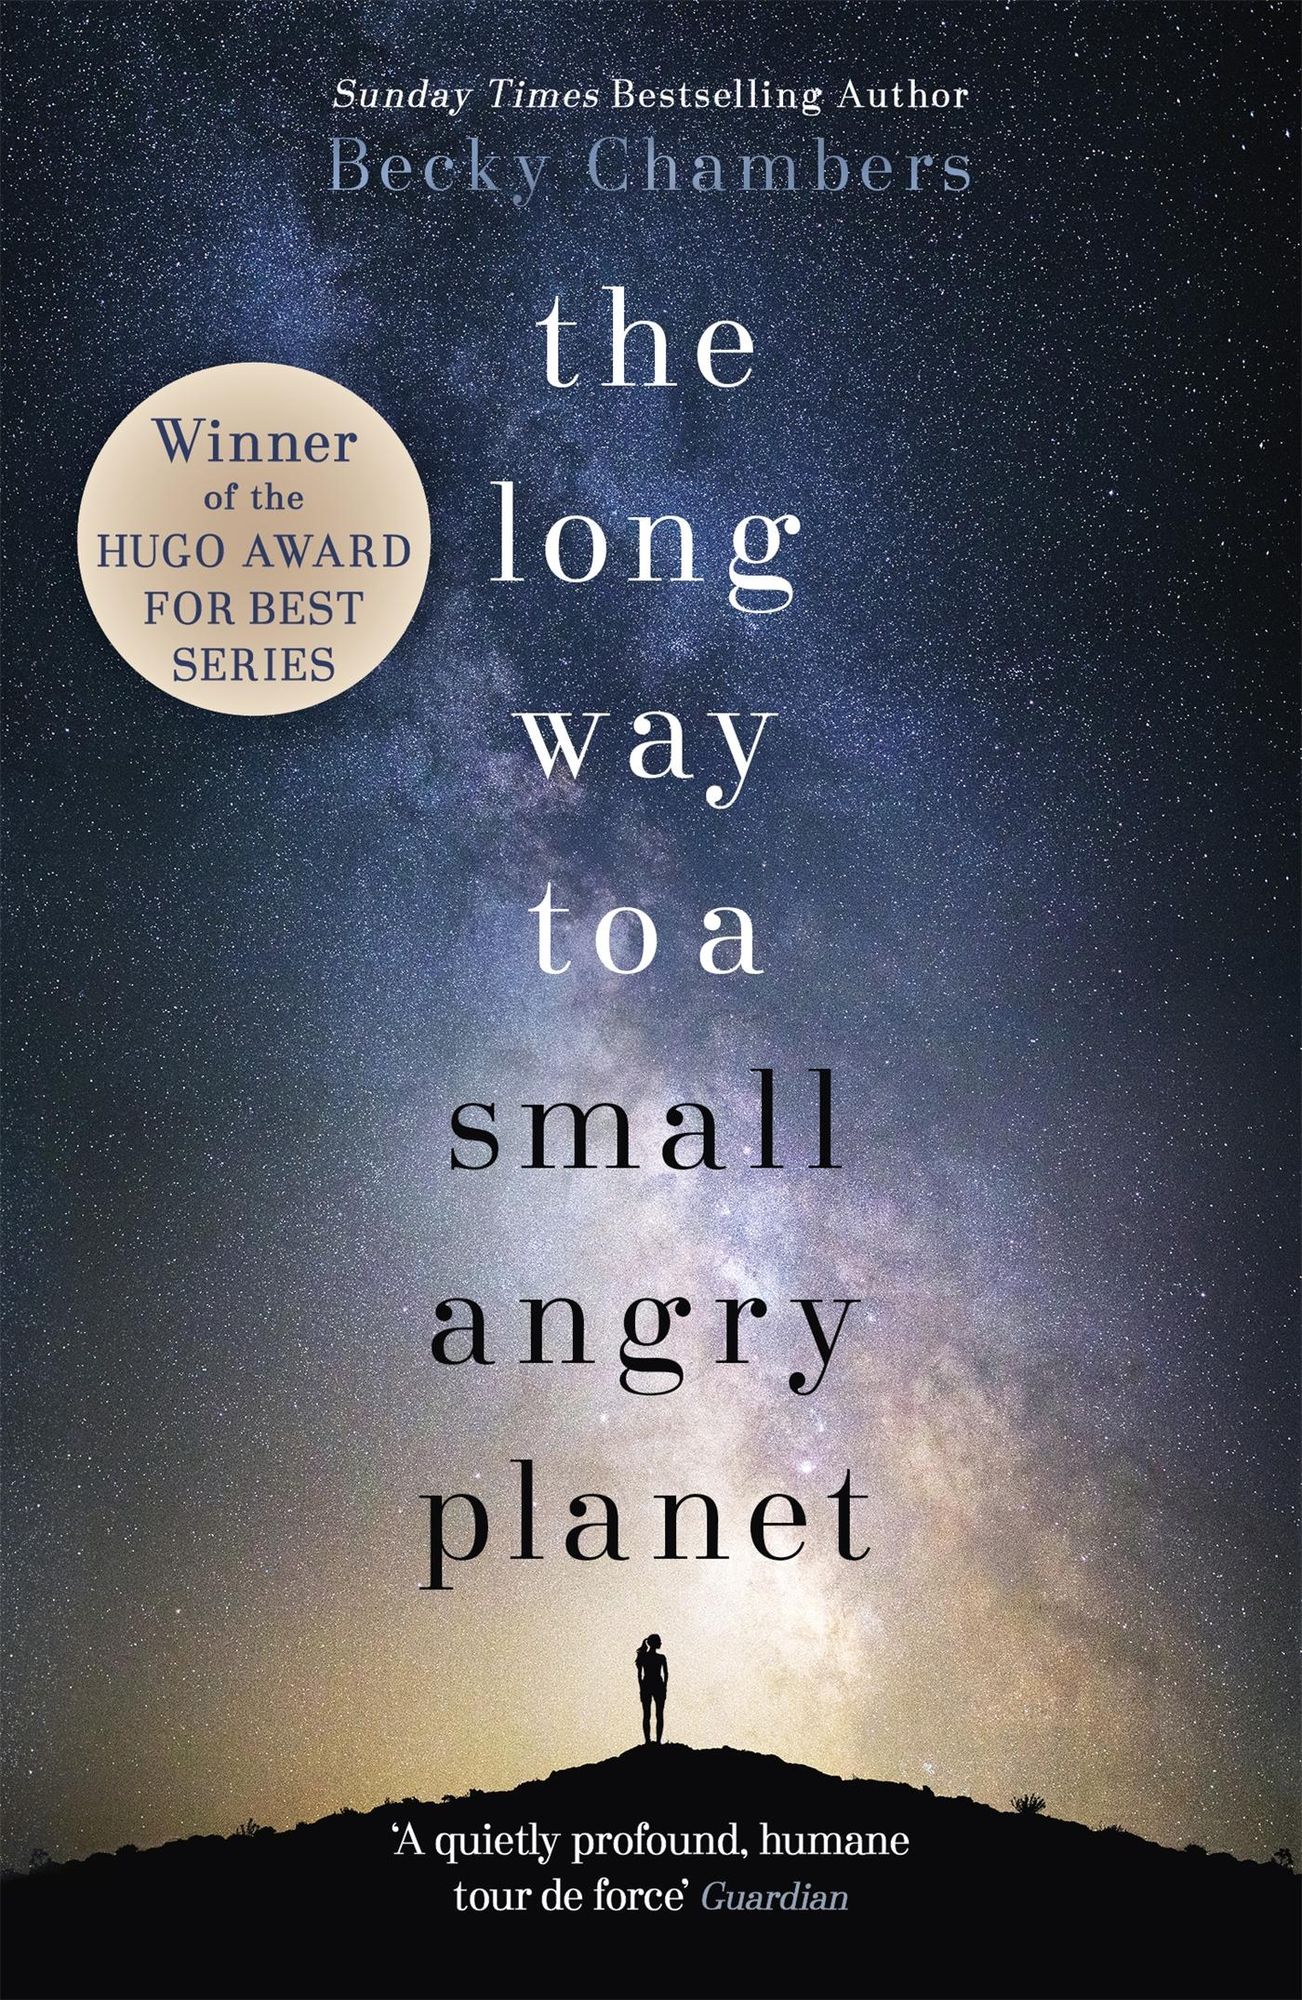 « The Long Way to a Small, Angry Planet », de Becky Chambers